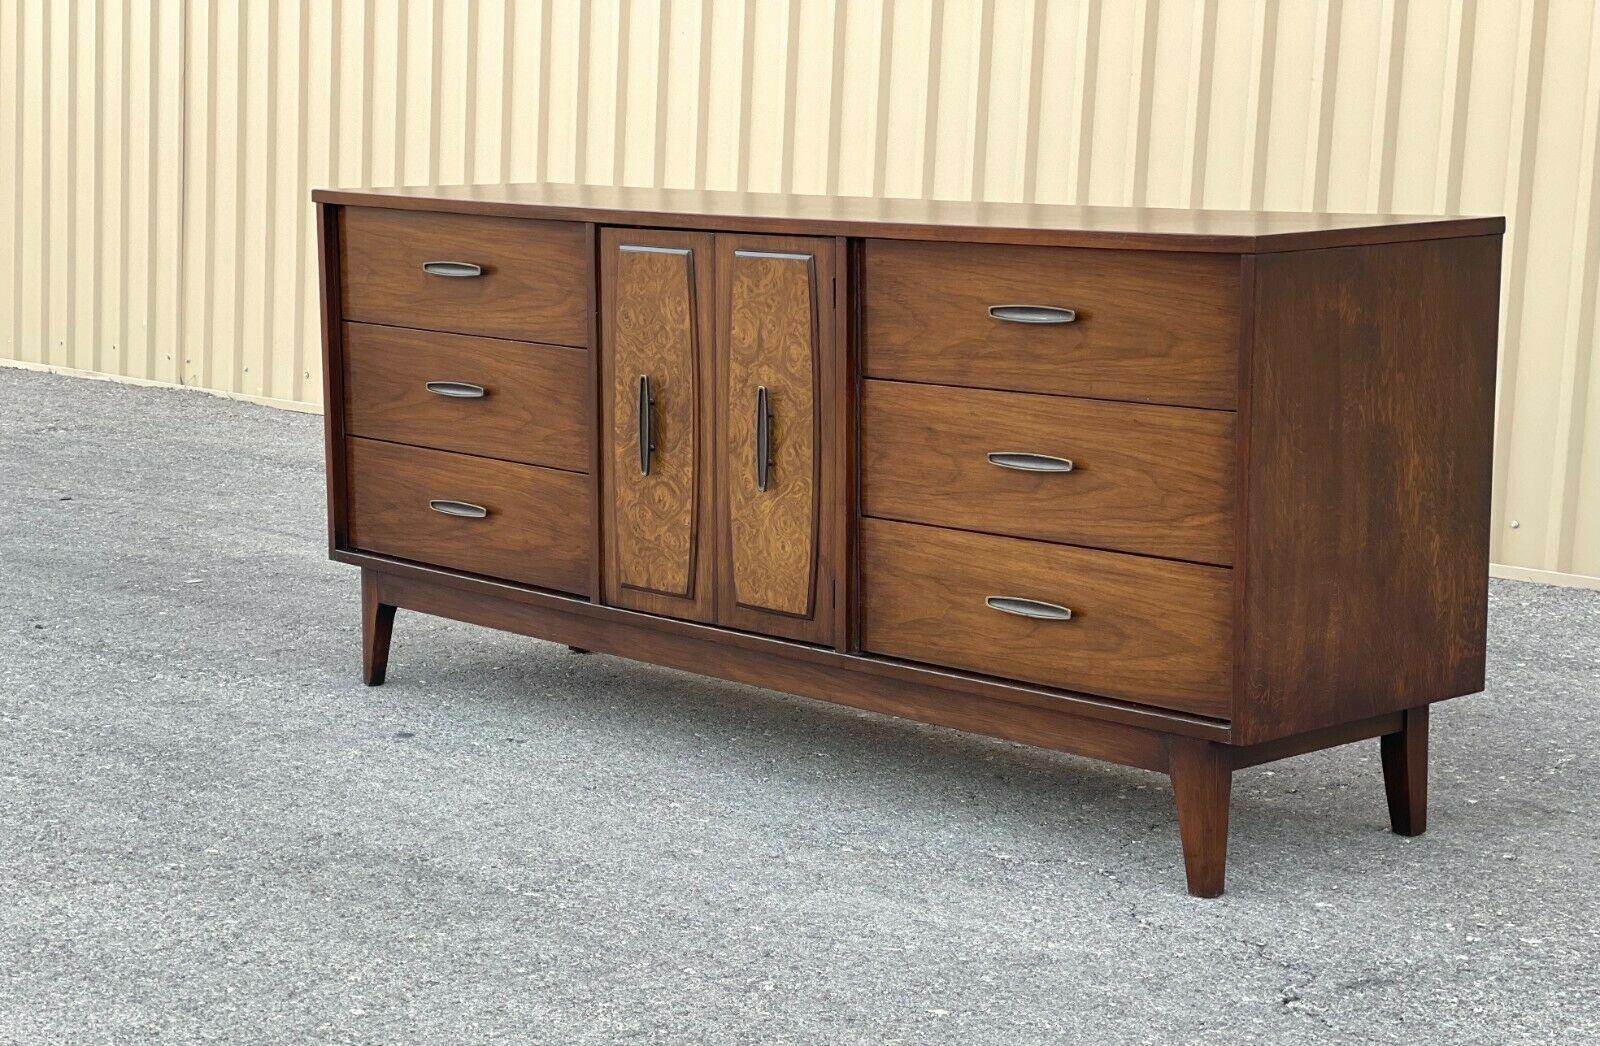 Mid-Century Danish Modern burl wood accent dresser/credenza


Offered is a vintage mid-century rich dark wood credenza. This piece is an excellent example of American mid-century modern living. Dresser has Nine drawers and burl wood accents